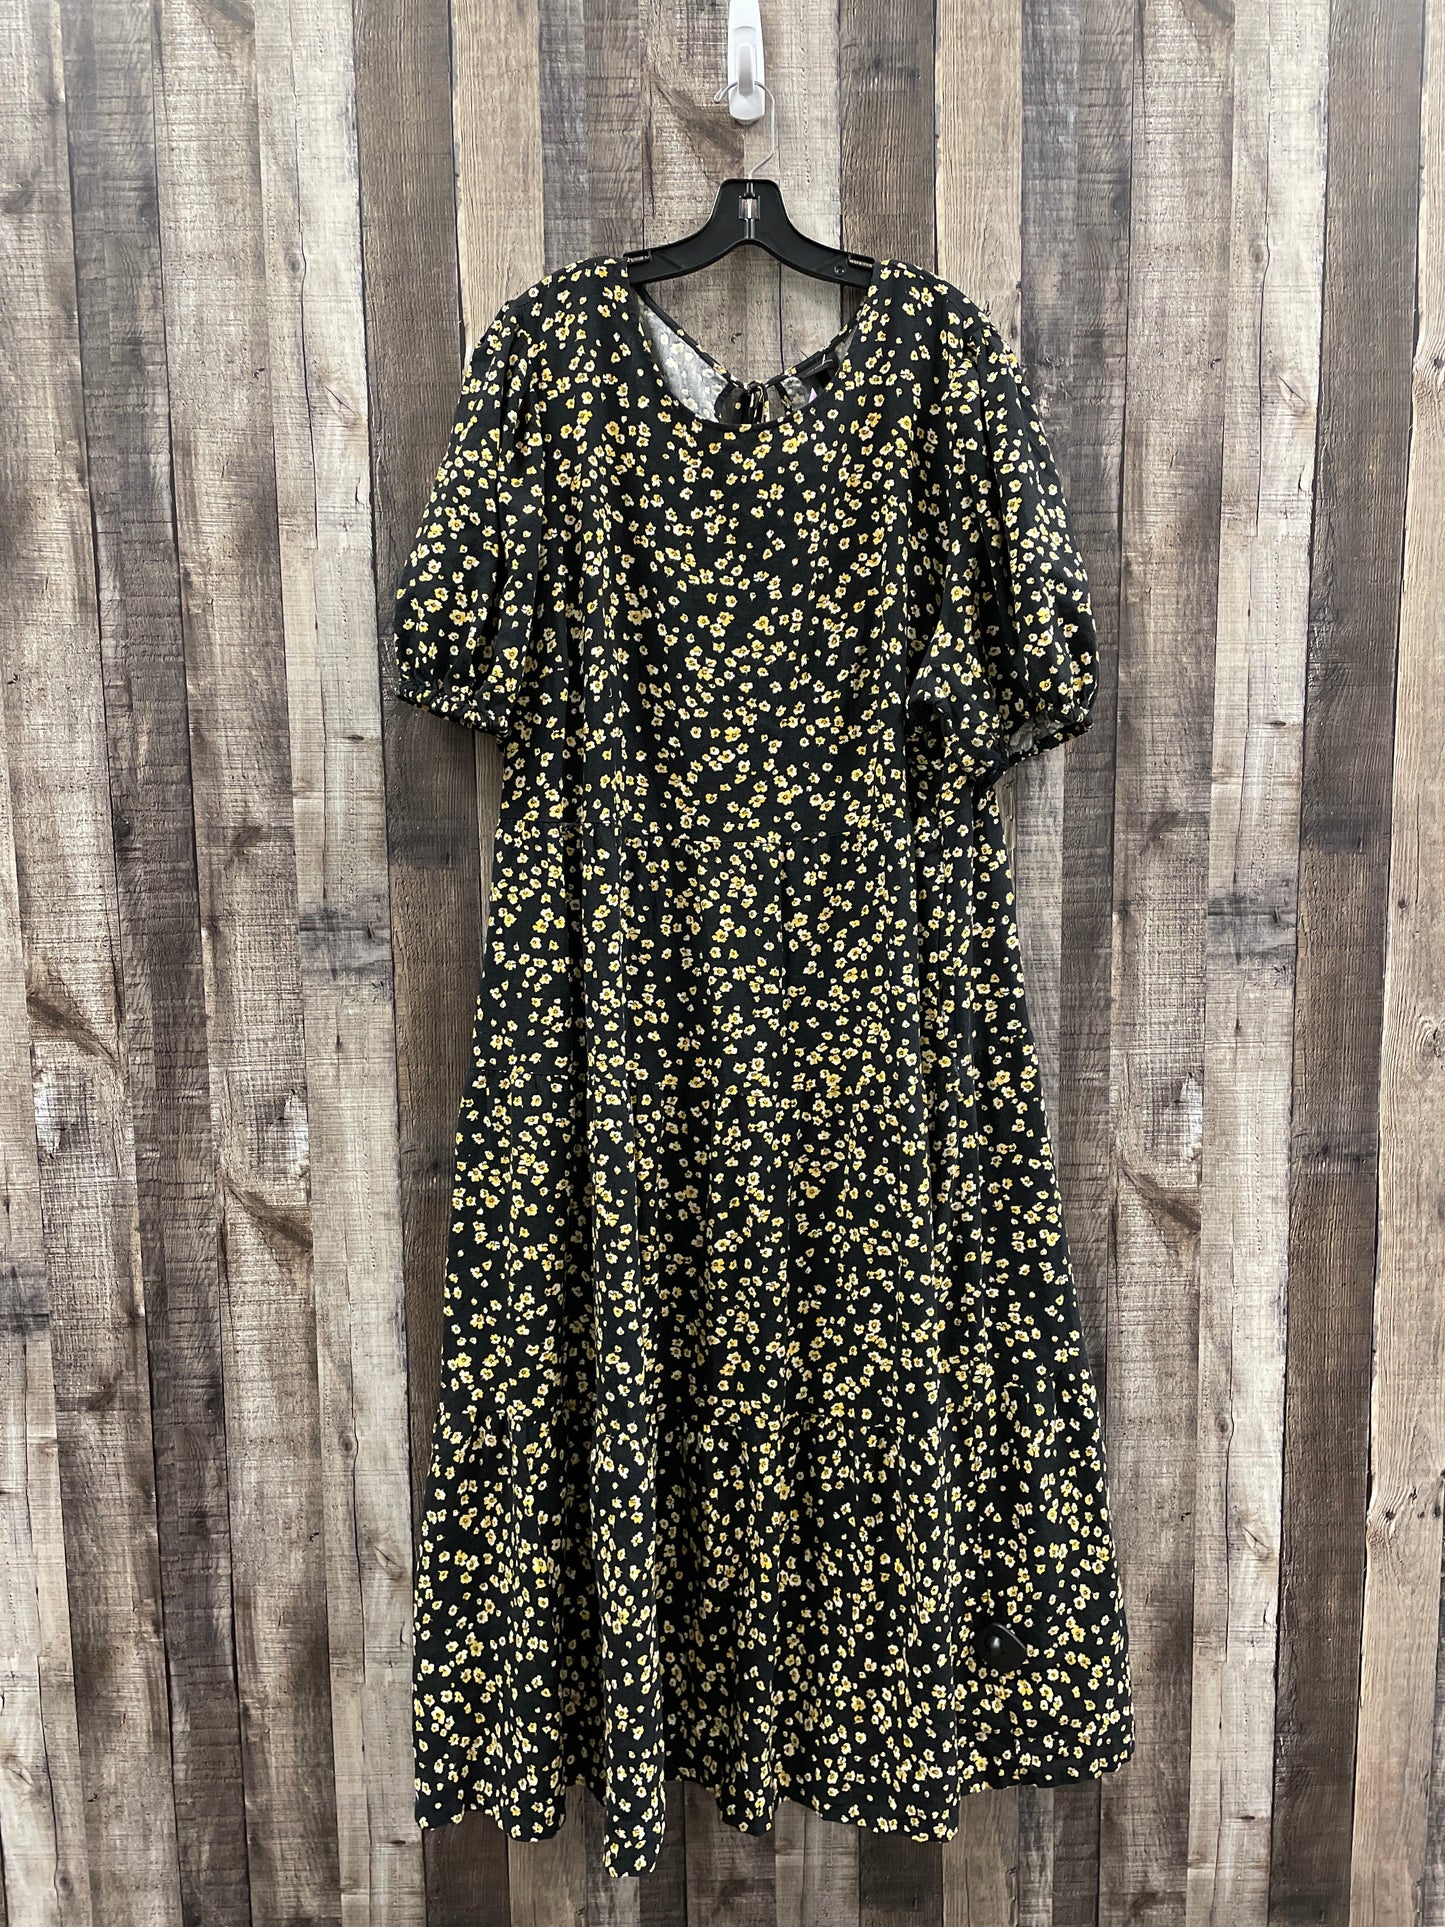 Black & Gold Dress Casual Maxi Who What Wear, Size 3x